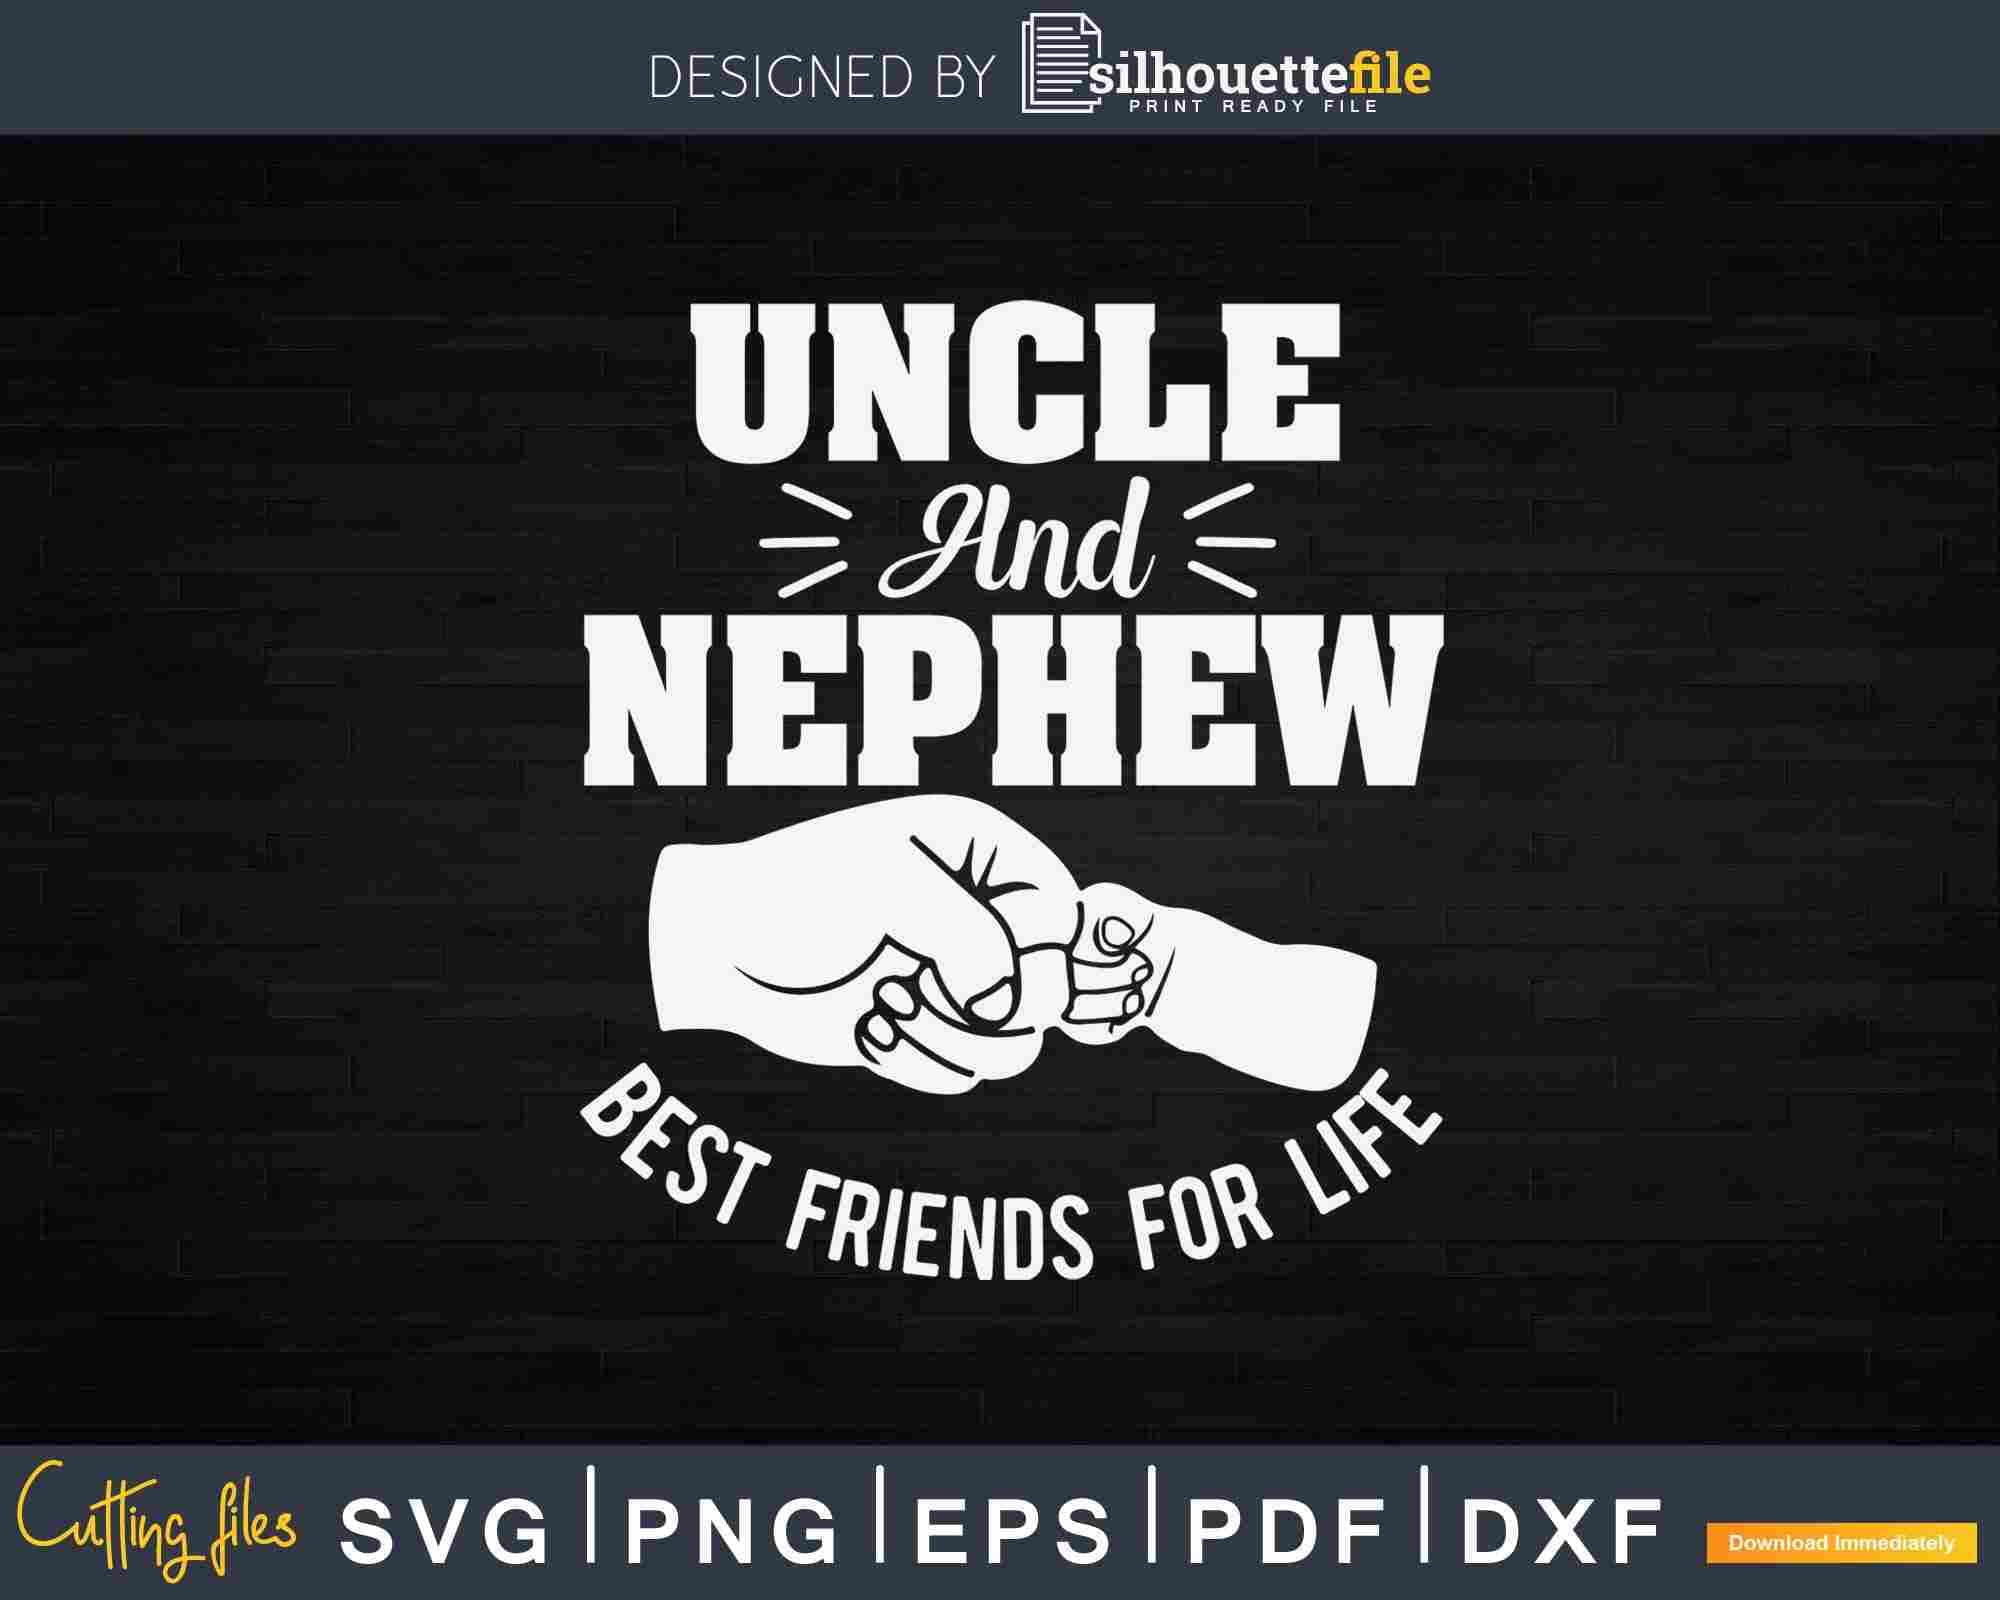 Uncle And Nephew Best Friends For Life Svg Dxf Png Designs Silhouettefile